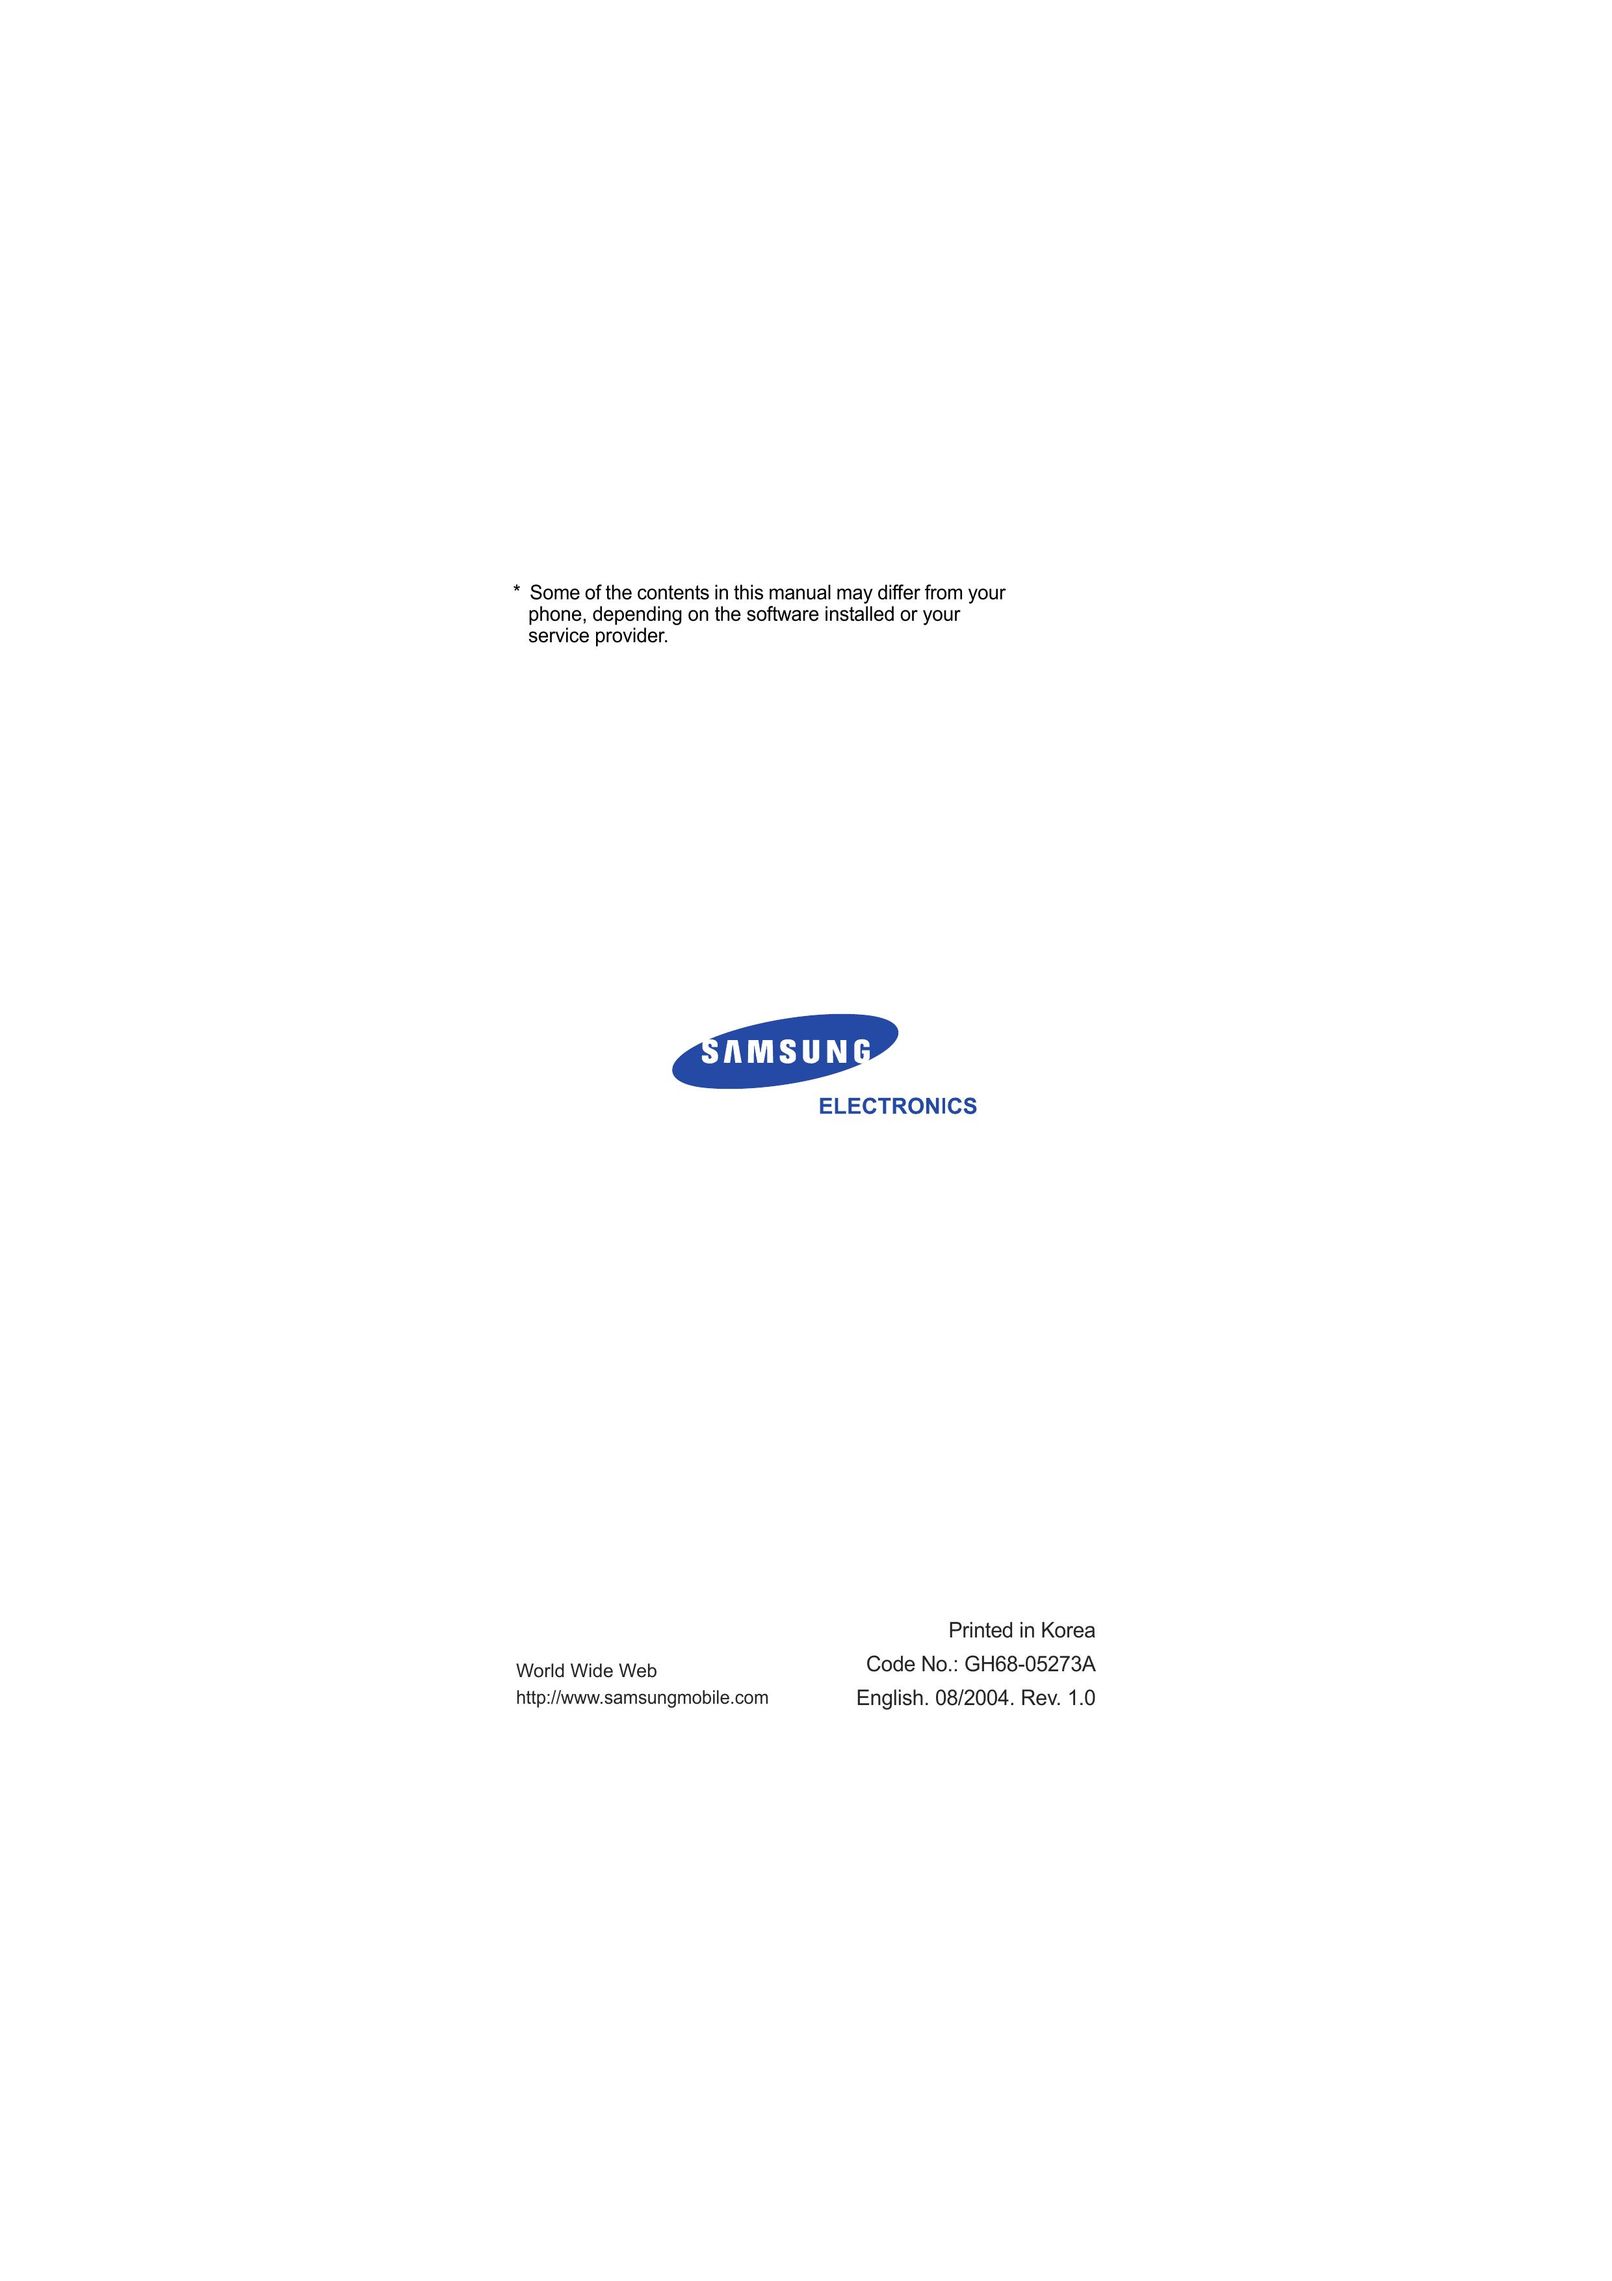 Samsung 08/2004 Cell Phone User Manual